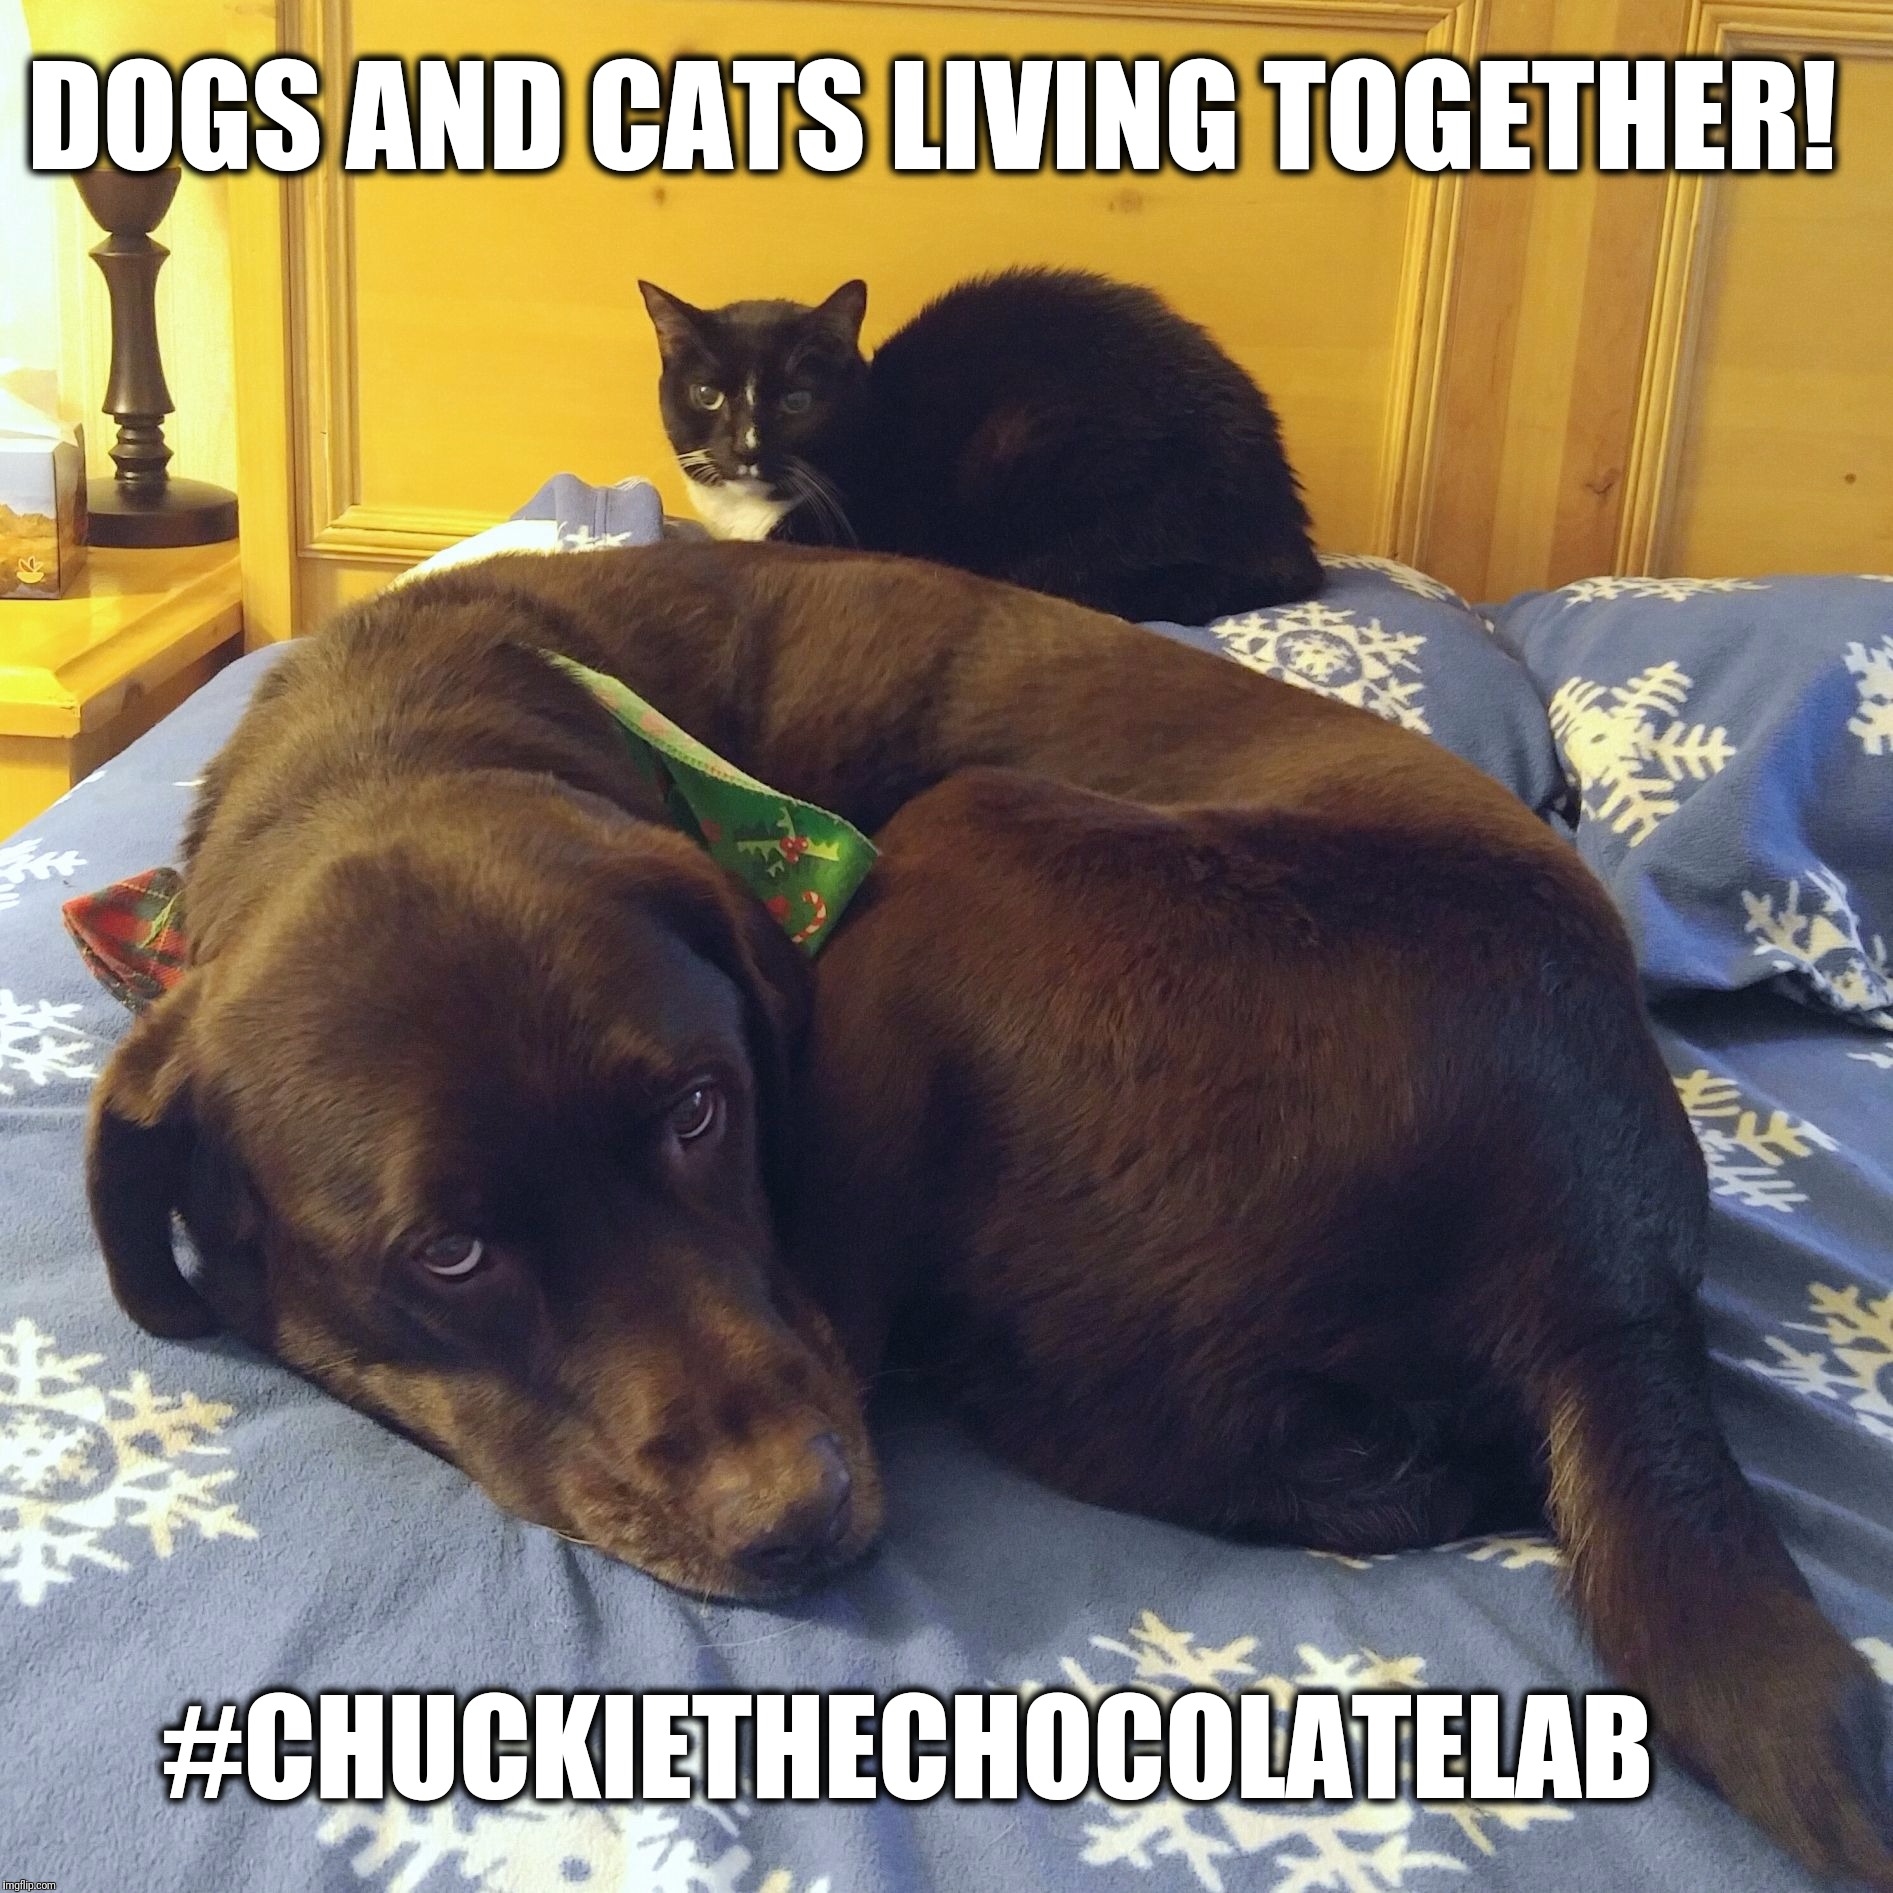 Dogs and cats living together!  | DOGS AND CATS LIVING TOGETHER! #CHUCKIETHECHOCOLATELAB | image tagged in chuckie the chocolate lab,dogs and cats,funny,memes,cute,ghostbusters | made w/ Imgflip meme maker